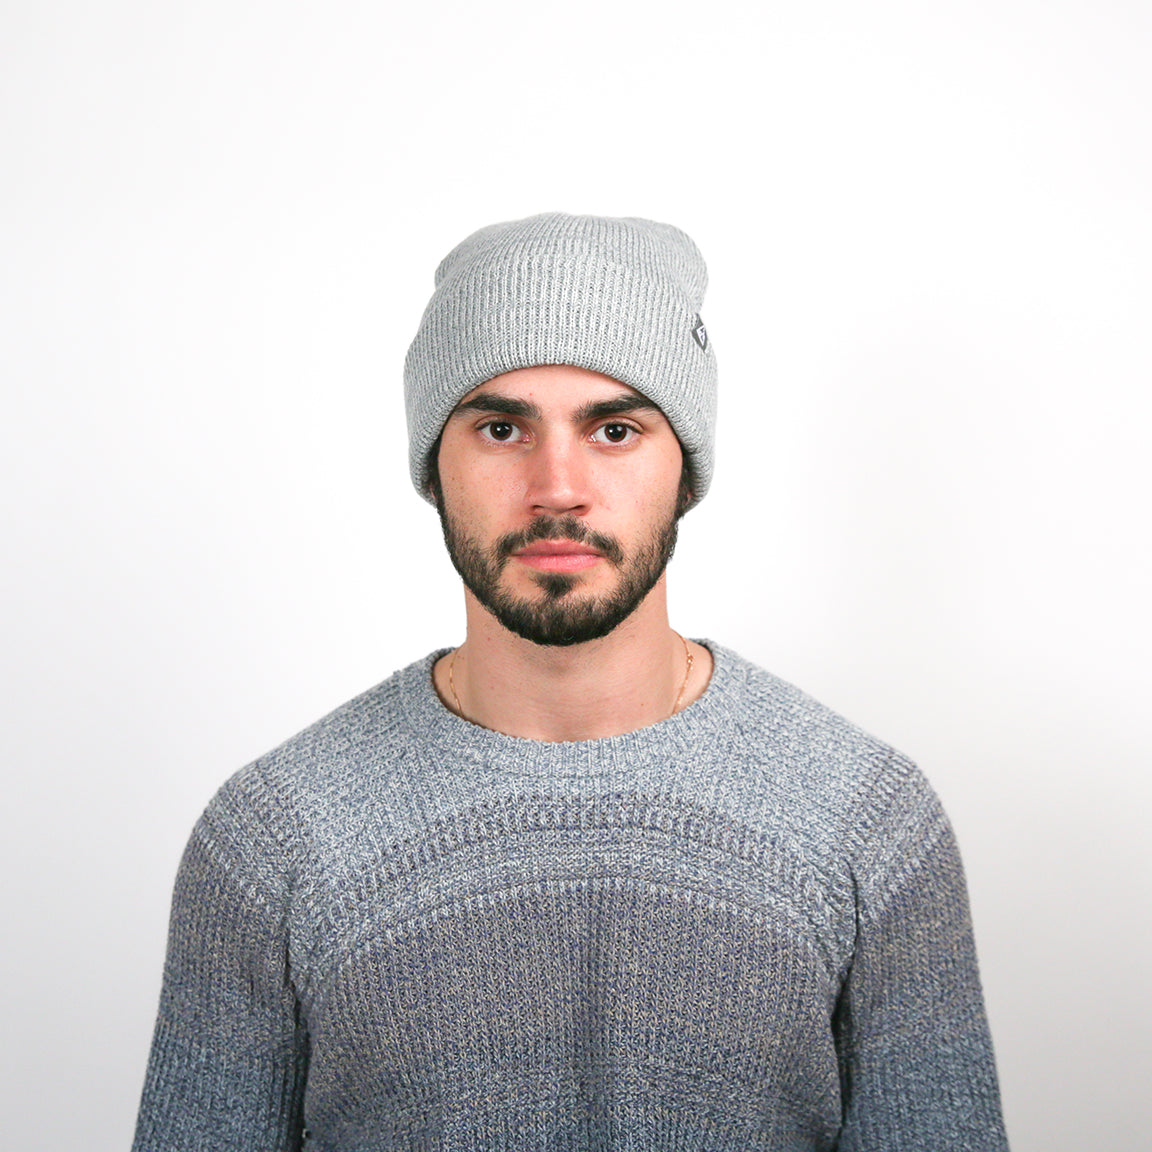 A model wearing a loosely fitted, light grey knit beanie with a subtle ribbed texture, providing a contemporary and easy-to-wear look.